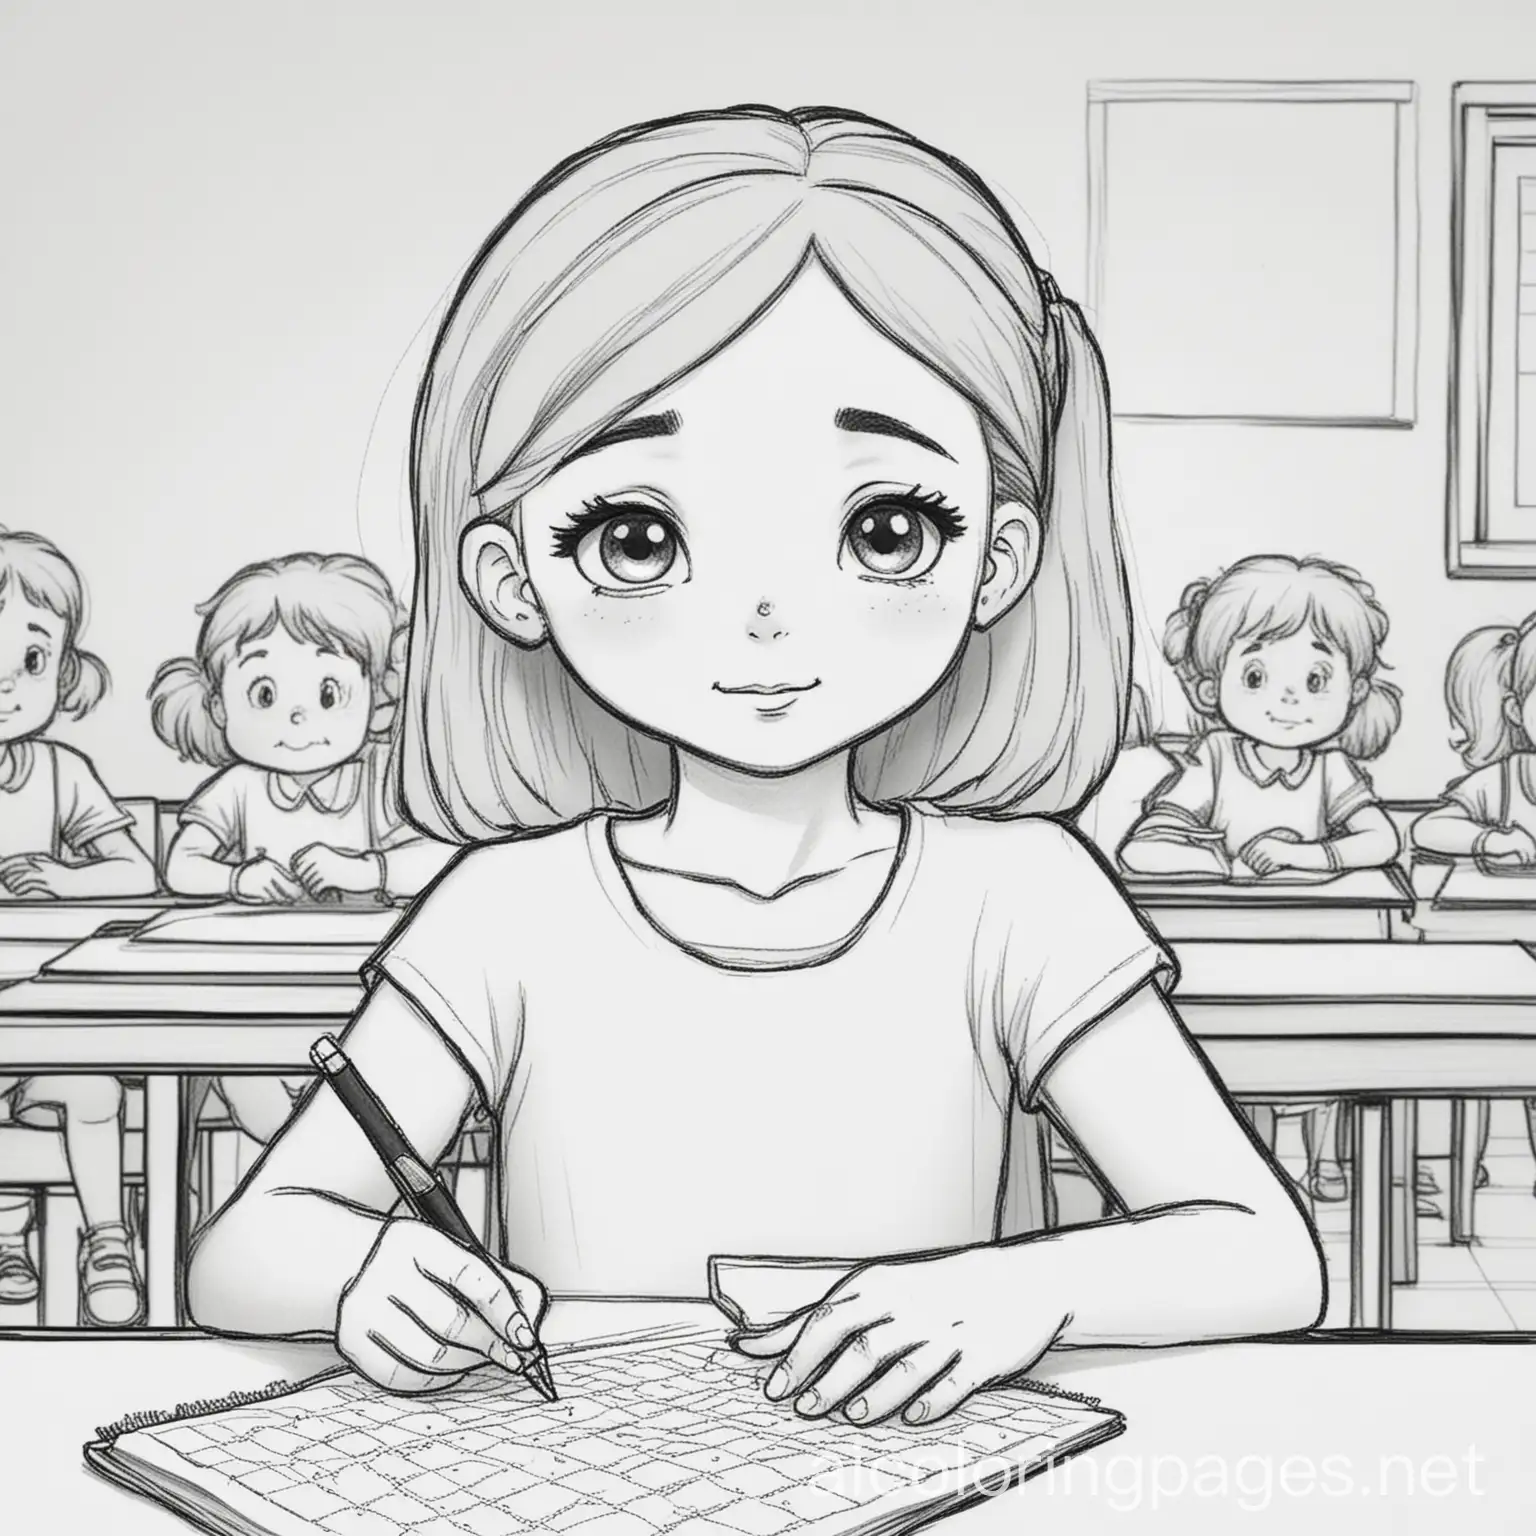 poor girl in classroom, Coloring Page, black and white, line art, white background, Simplicity, Ample White Space. The background of the coloring page is plain white to make it easy for young children to color within the lines. The outlines of all the subjects are easy to distinguish, making it simple for kids to color without too much difficulty